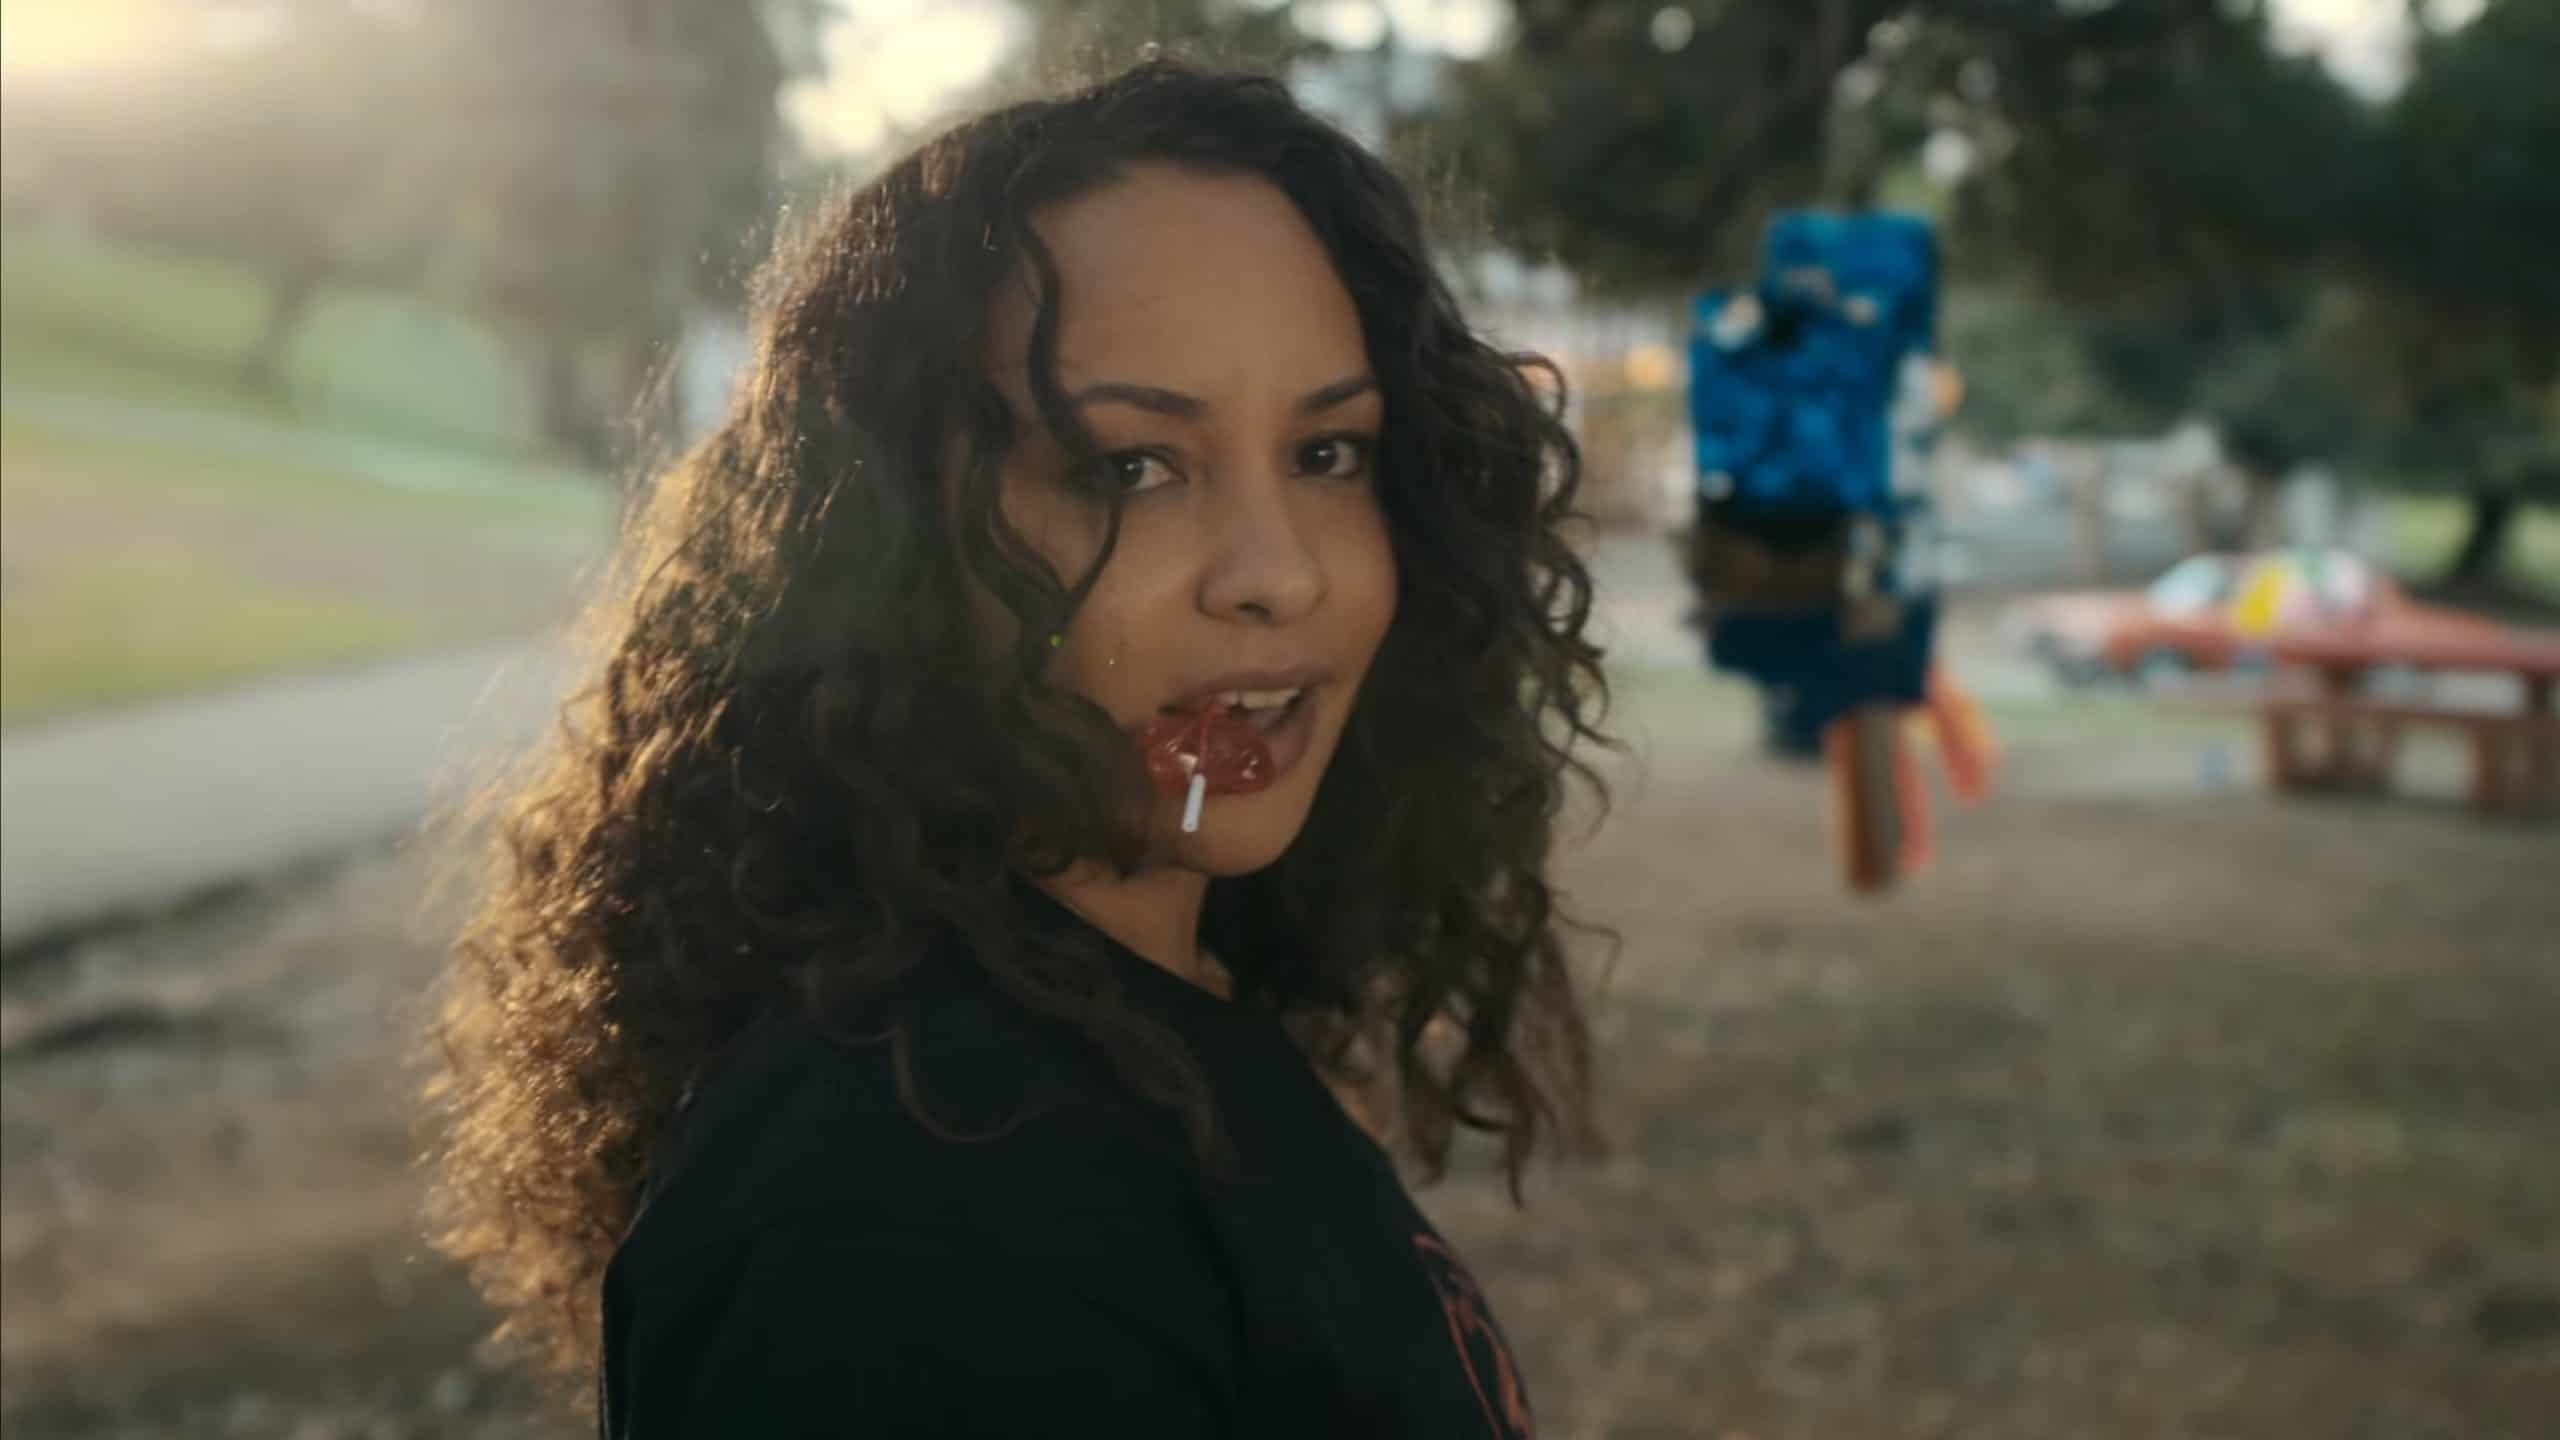 Ashley (Jasmine Cephas Jones) with a penis lollipop in her mouth